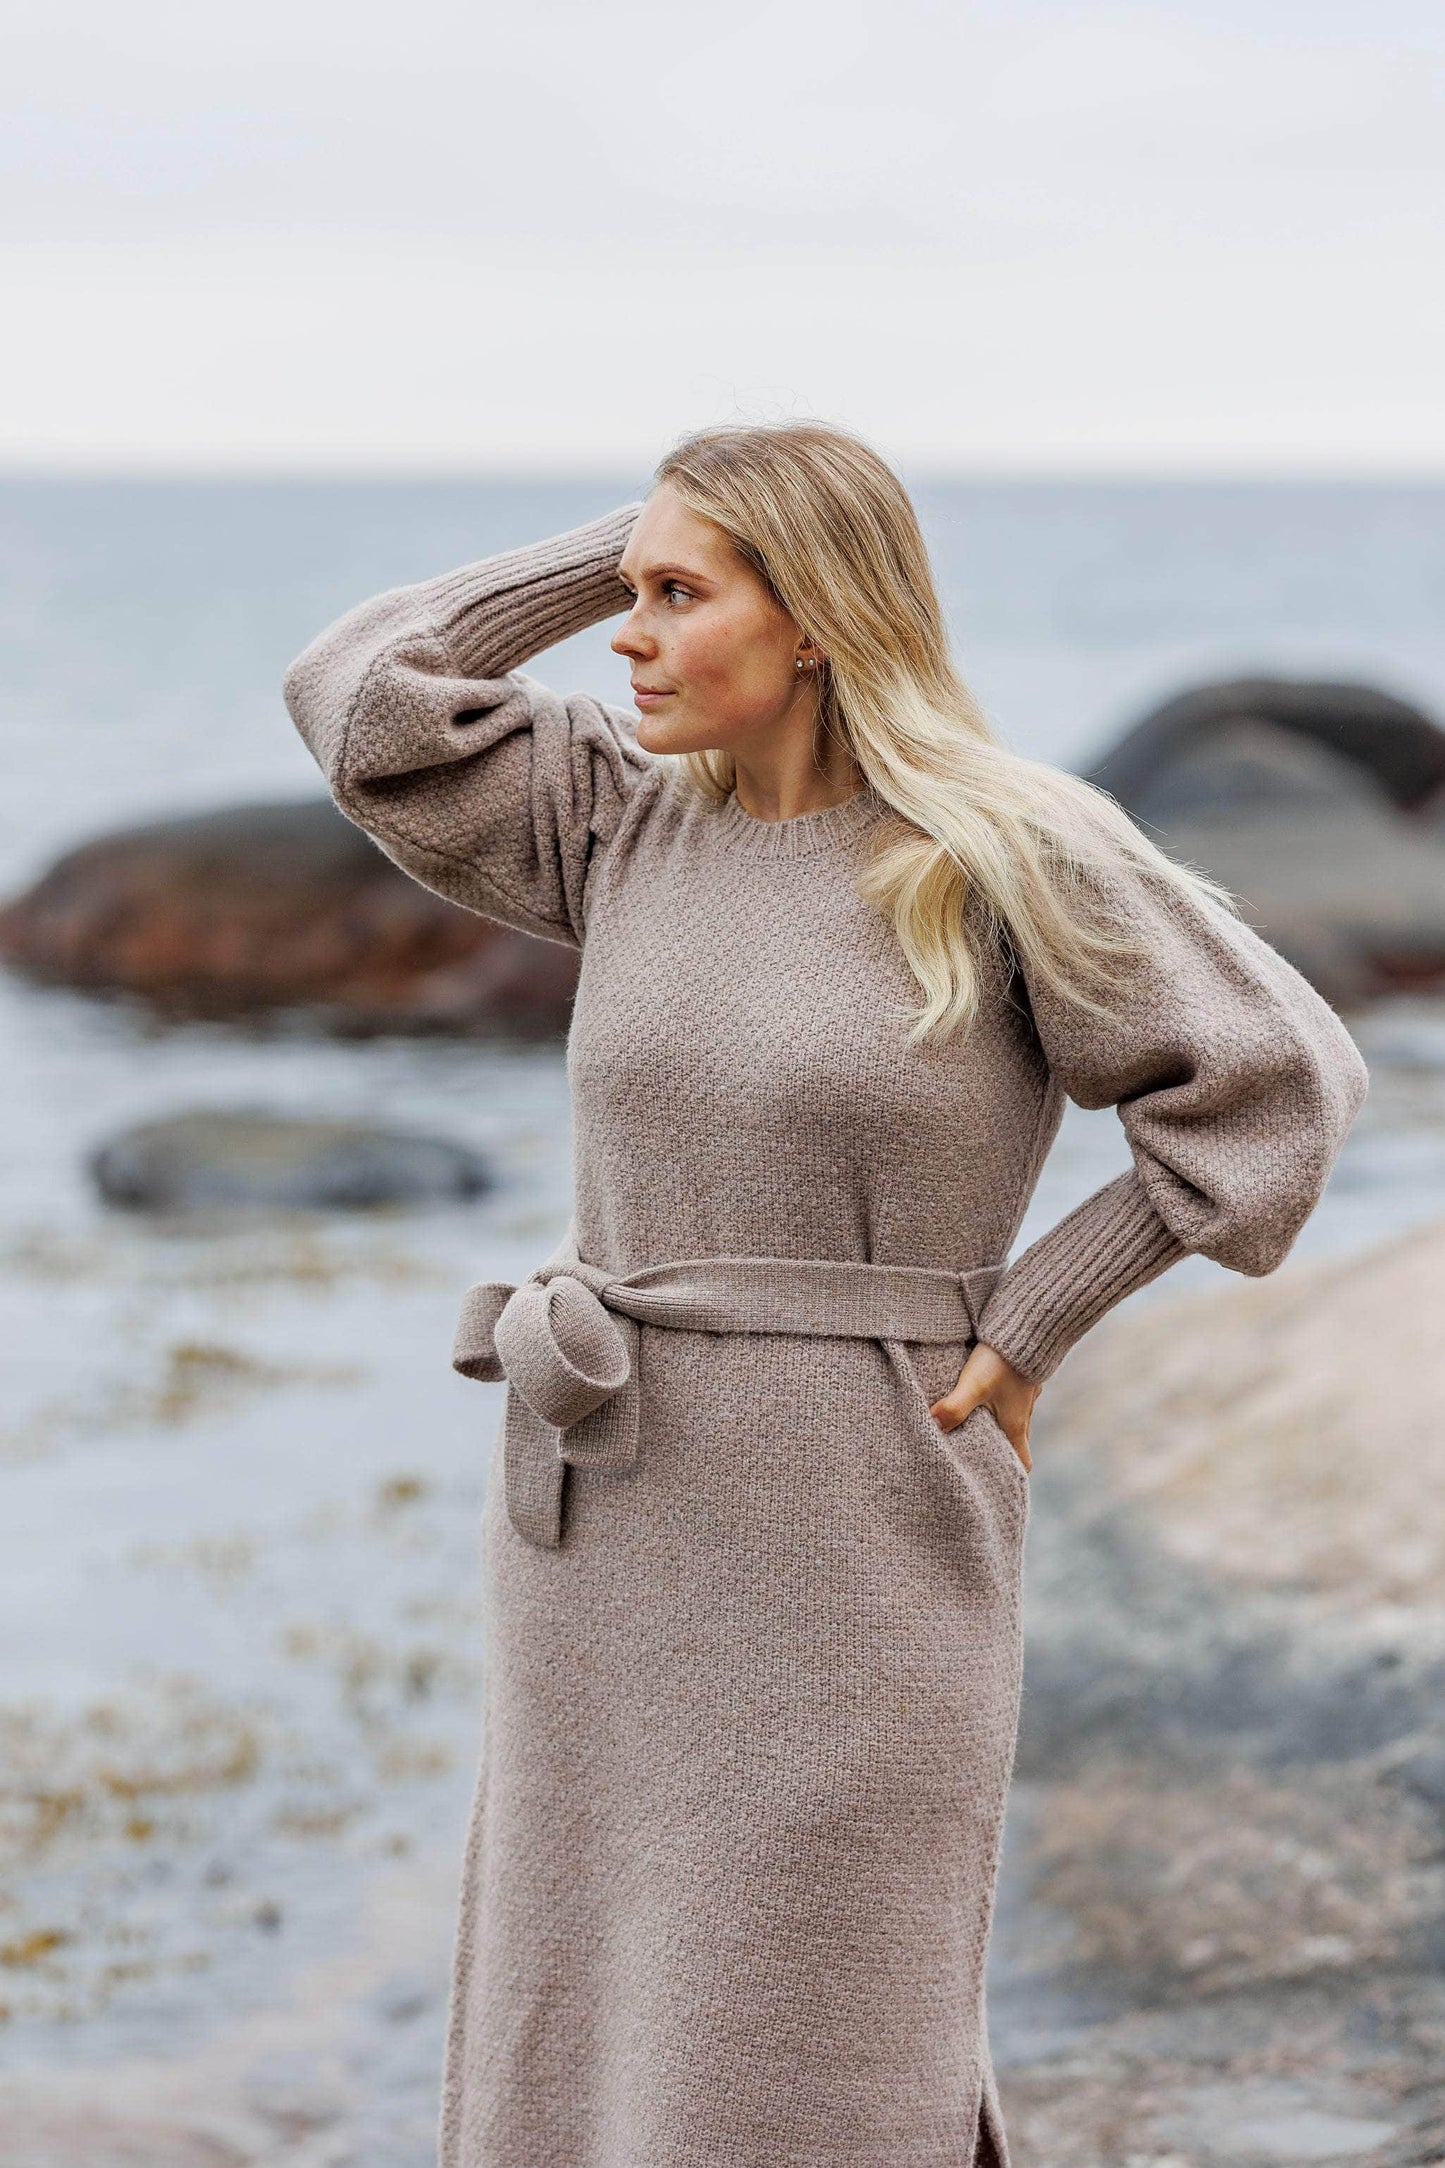 ByLien-Shop Chunky Dress - Simply Taupe